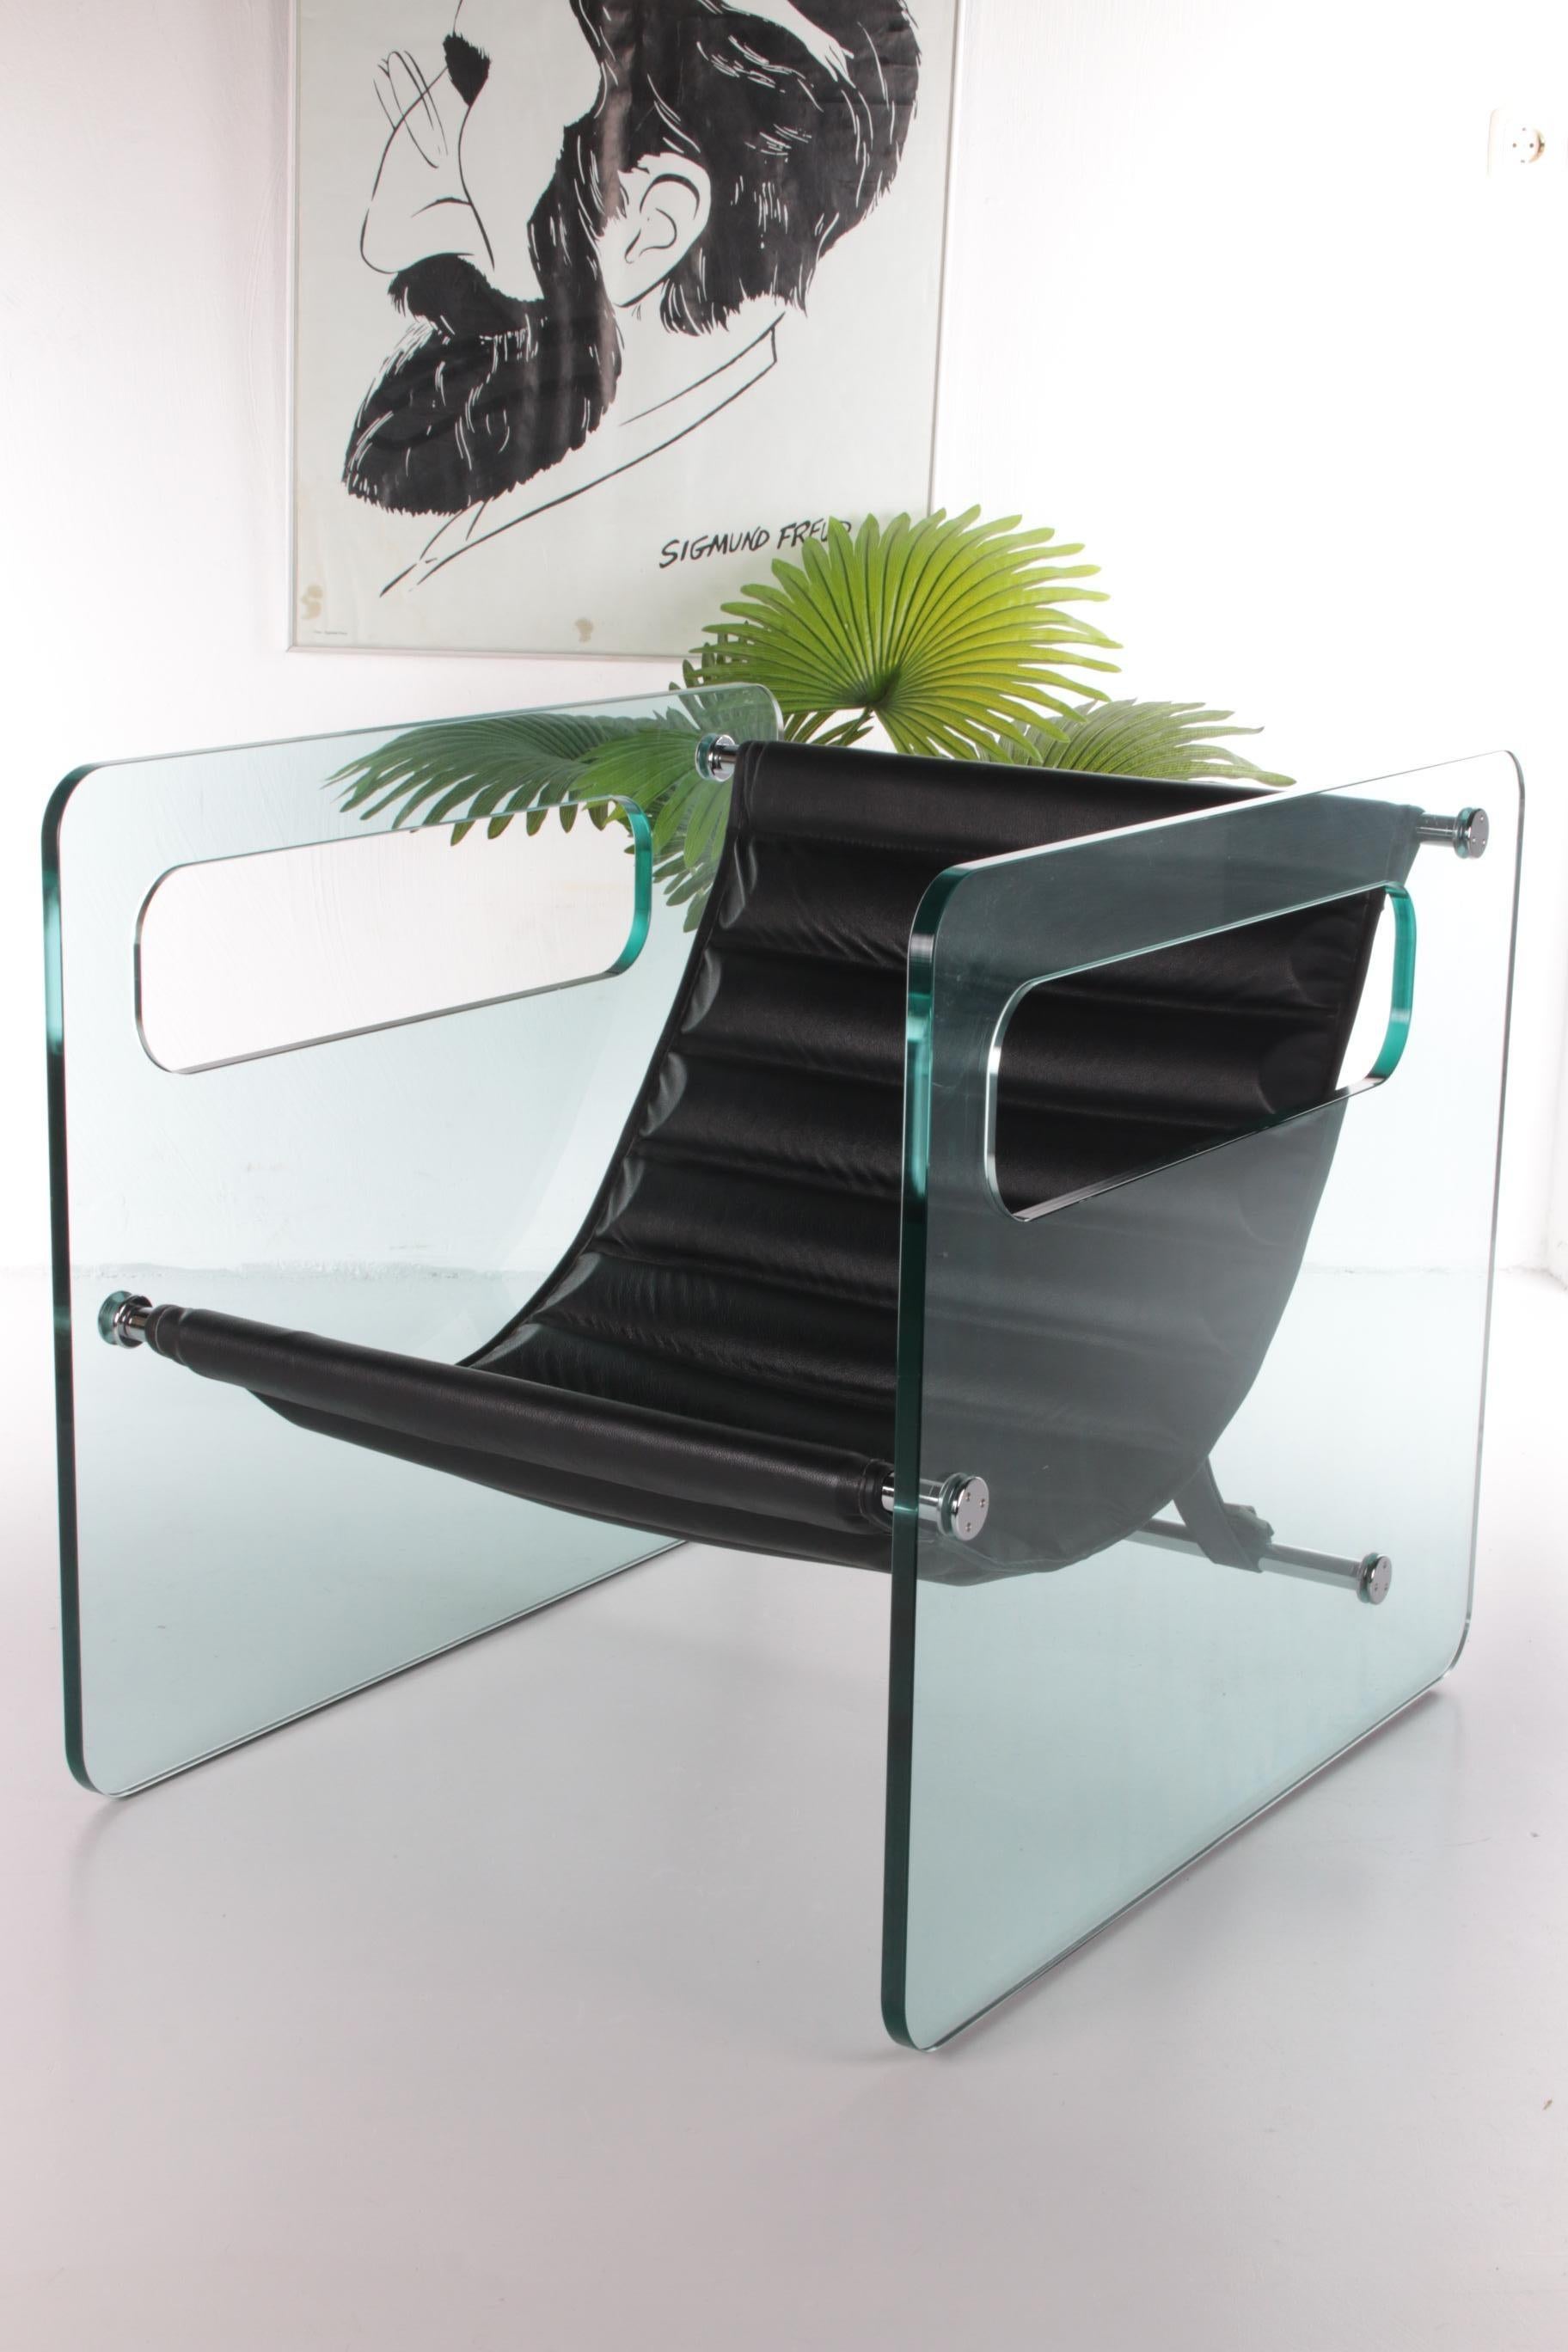 One of the most beautiful modernist transparent design chairs.

The perfect modern chair for your own minimalist glass house.

The Naked chair was designed by Giovanni Tommaso Garattoni in Italy. It is a minimalistic modern armchair.

This